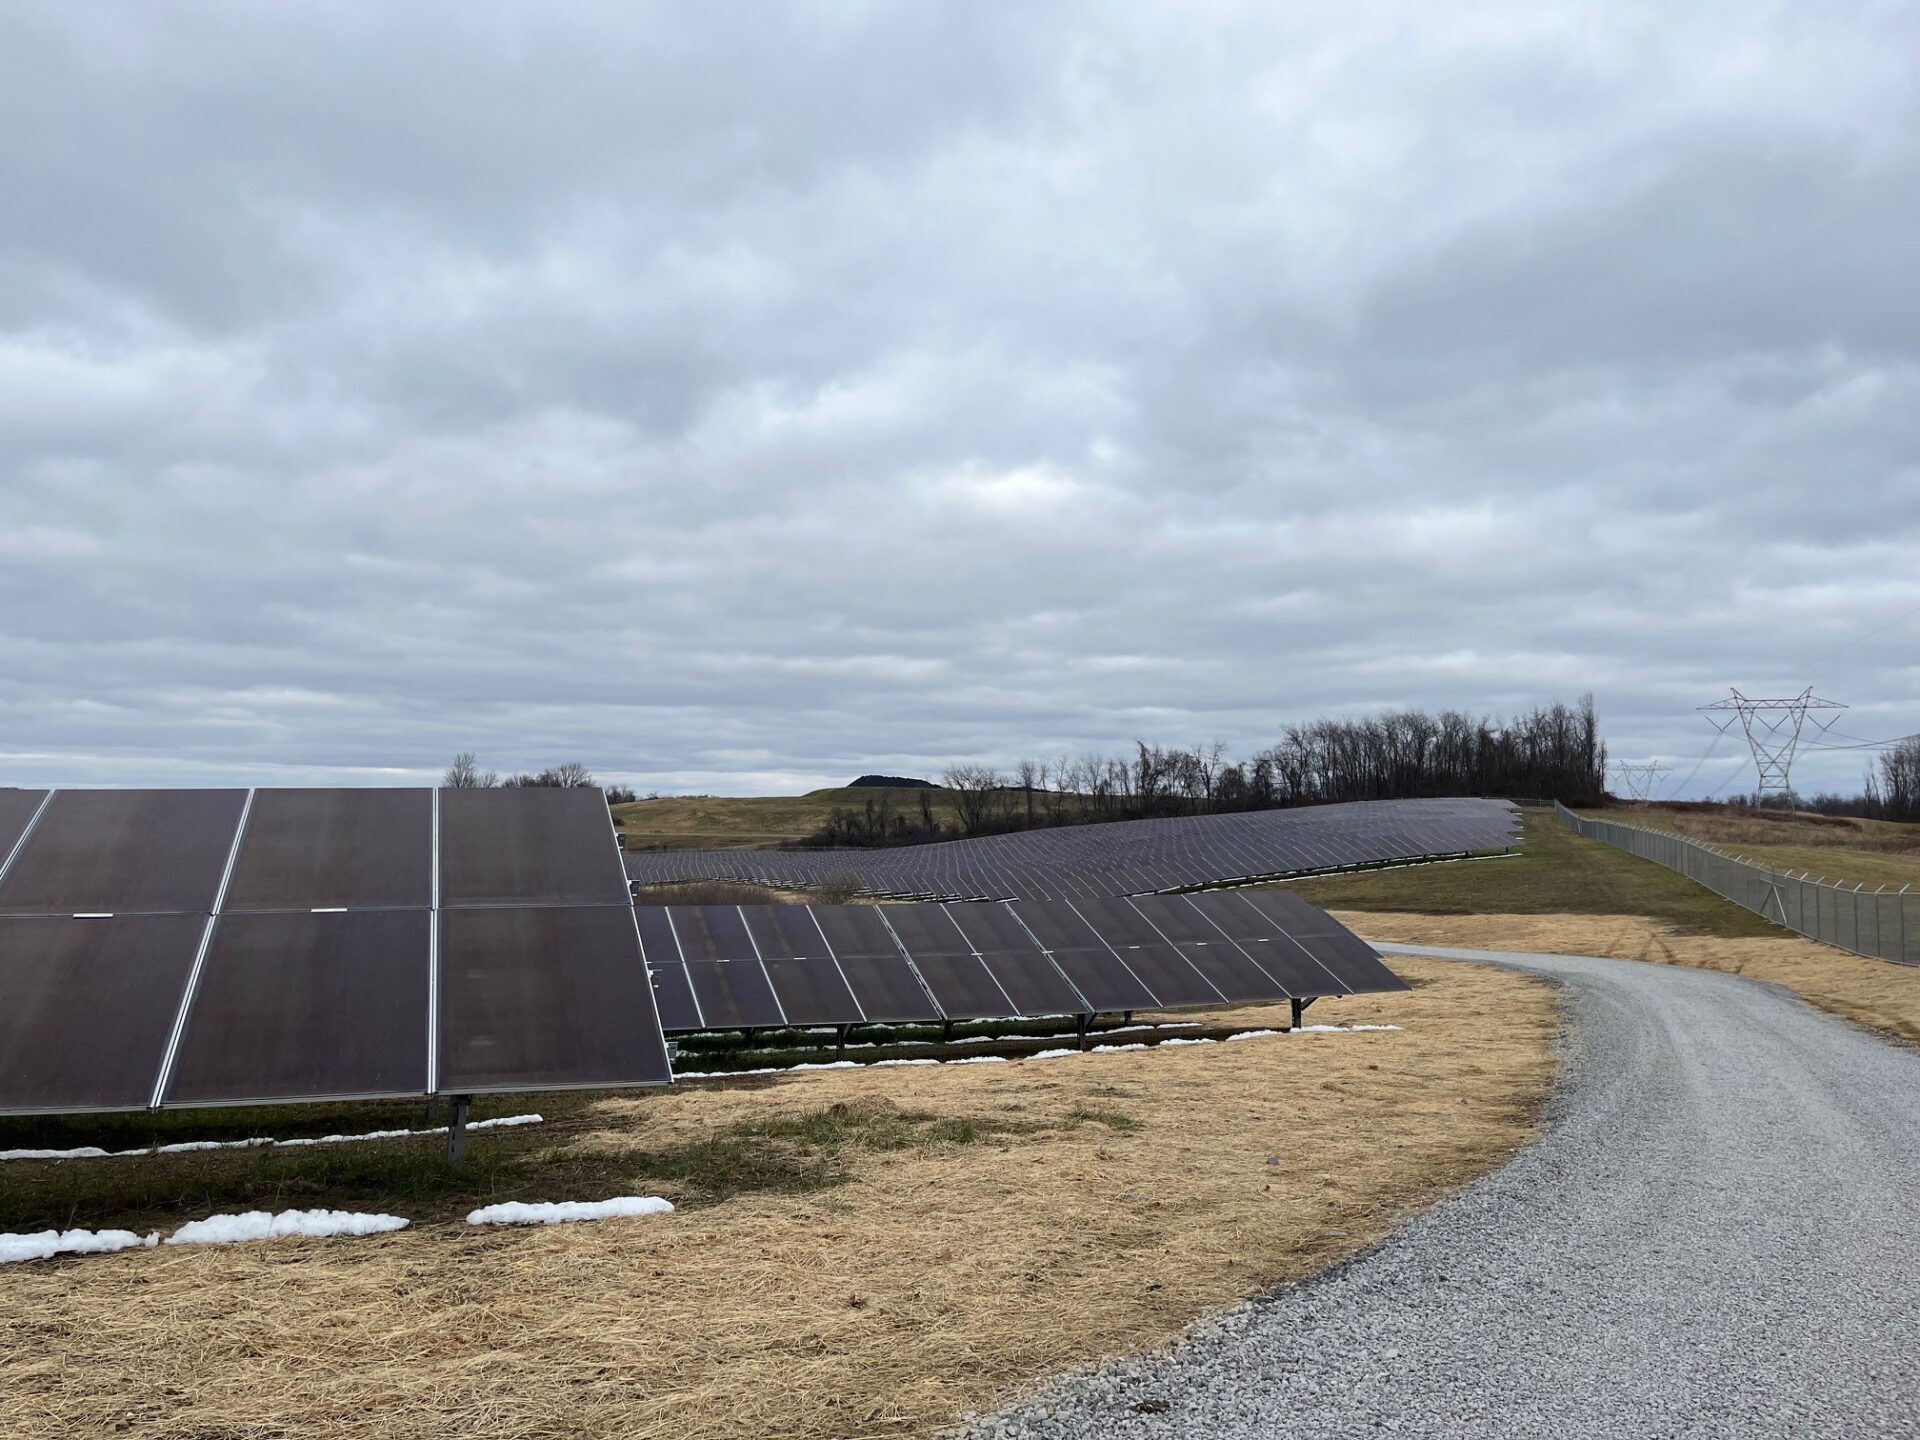 Black solar panels spread out over a rolling hill, with new grass planted below and a gravel road running between them.